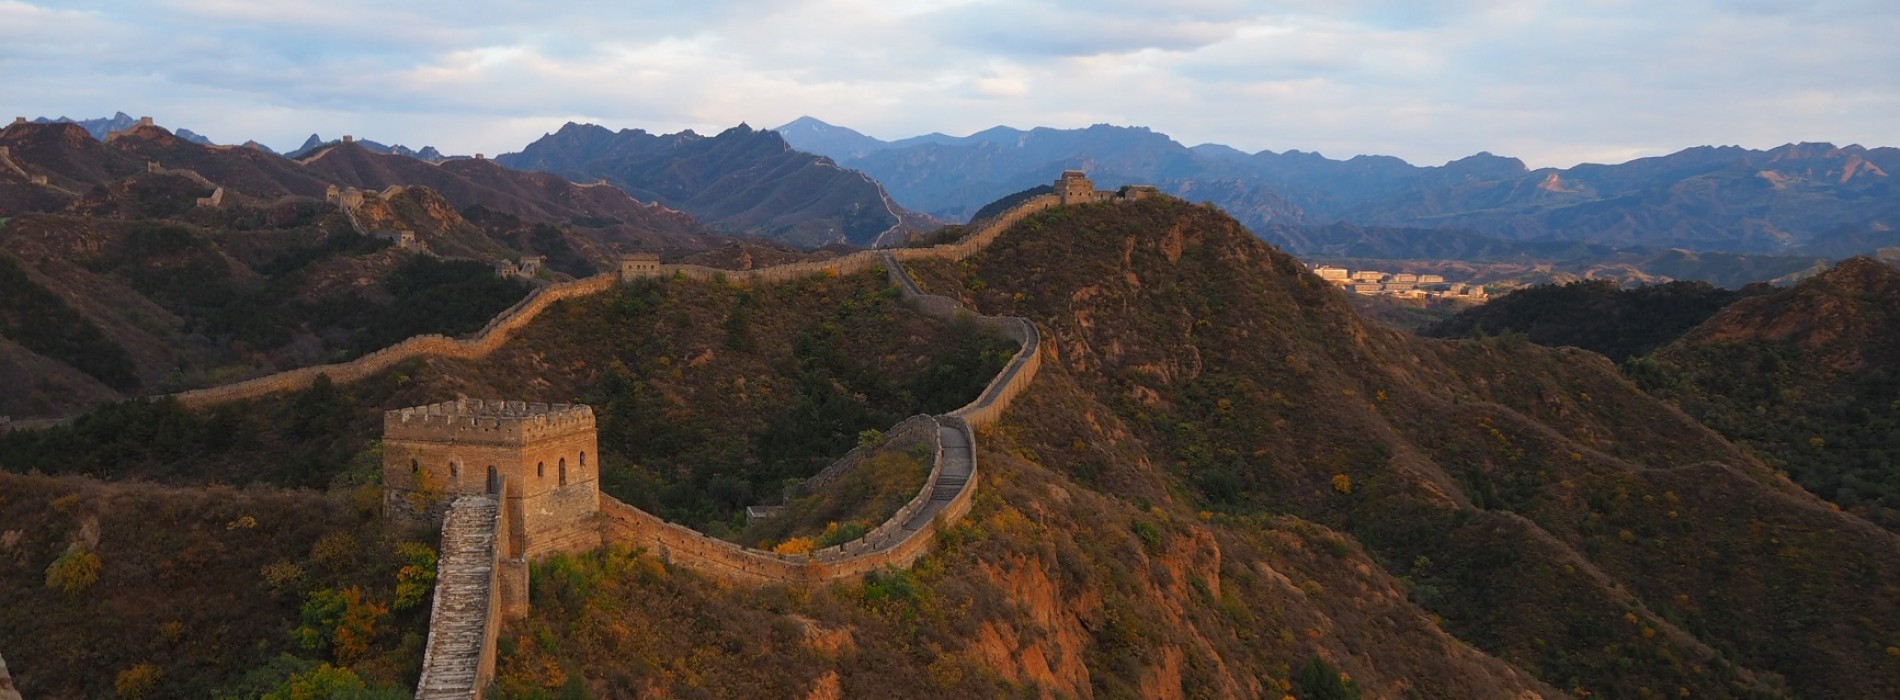 Sunset on The Great Wall of China